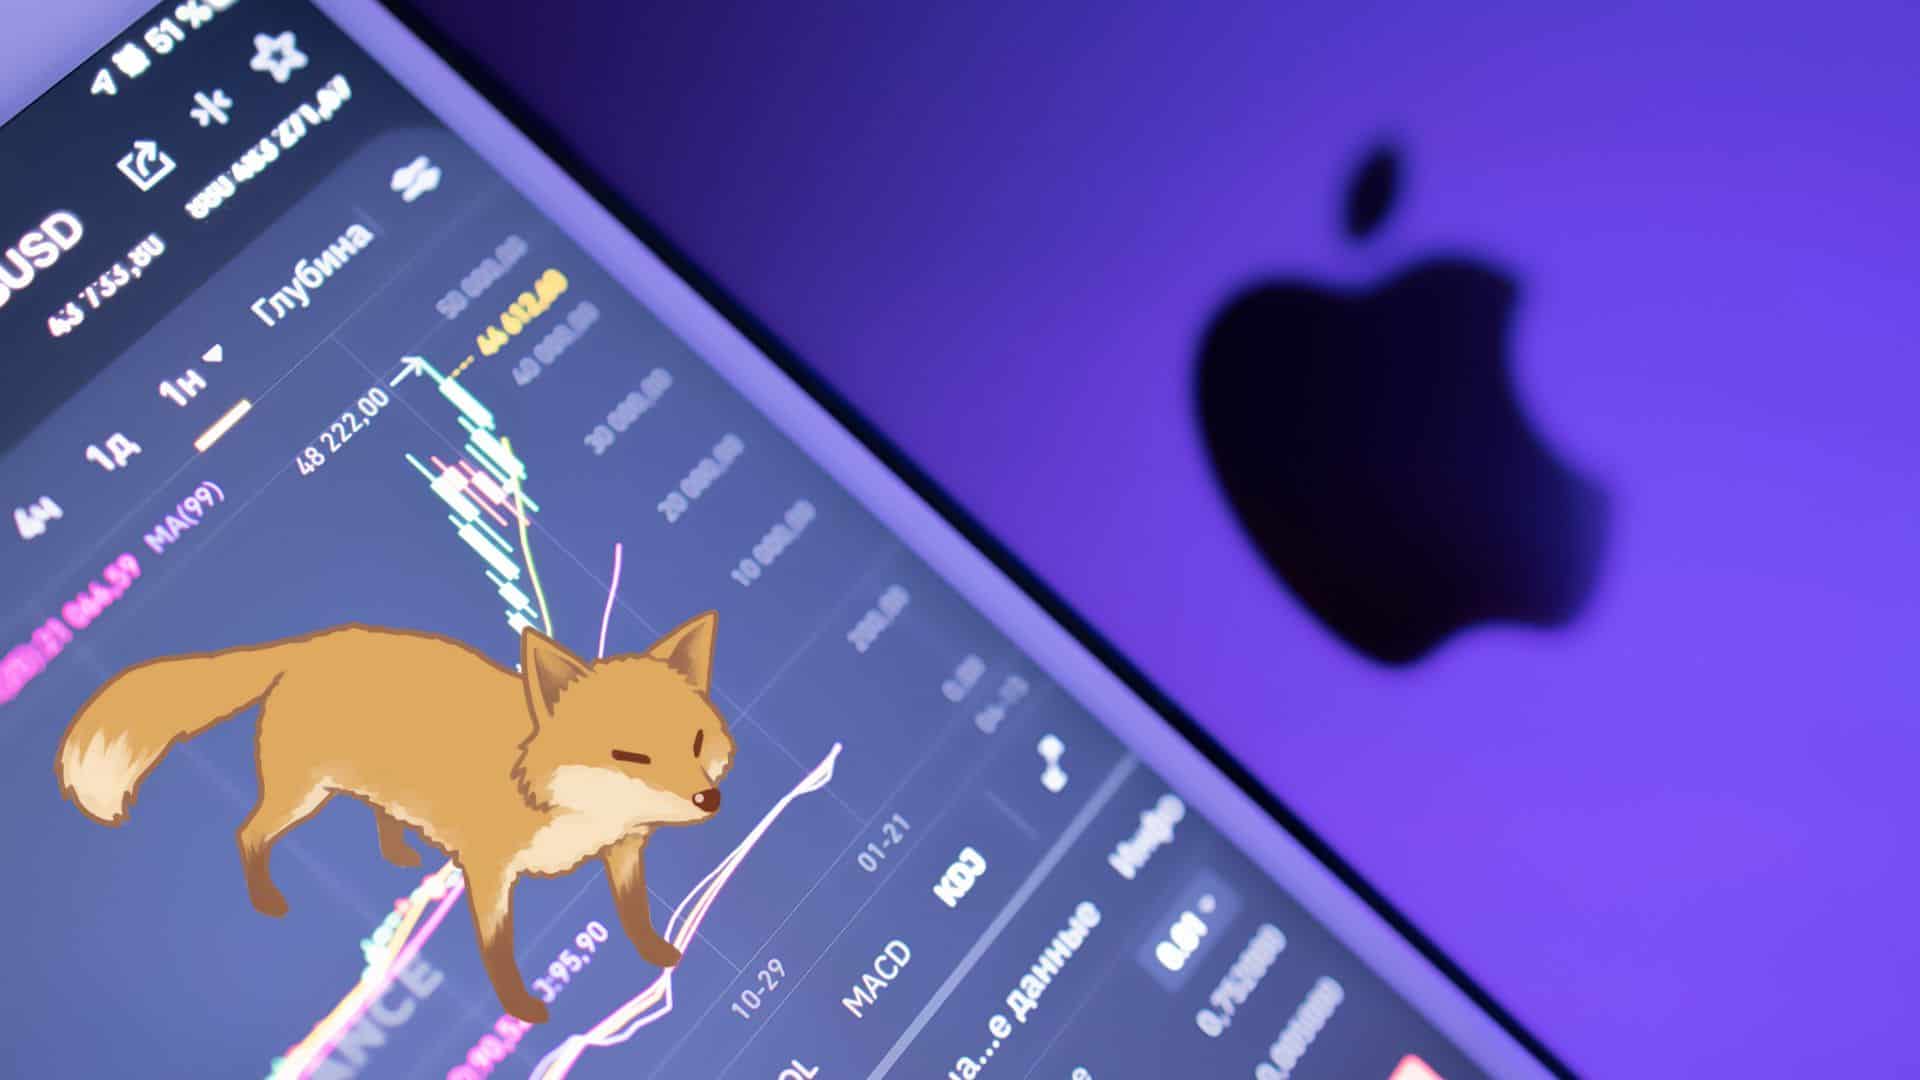 MetaMask Users Can Buy Crypto Using Apple Pay